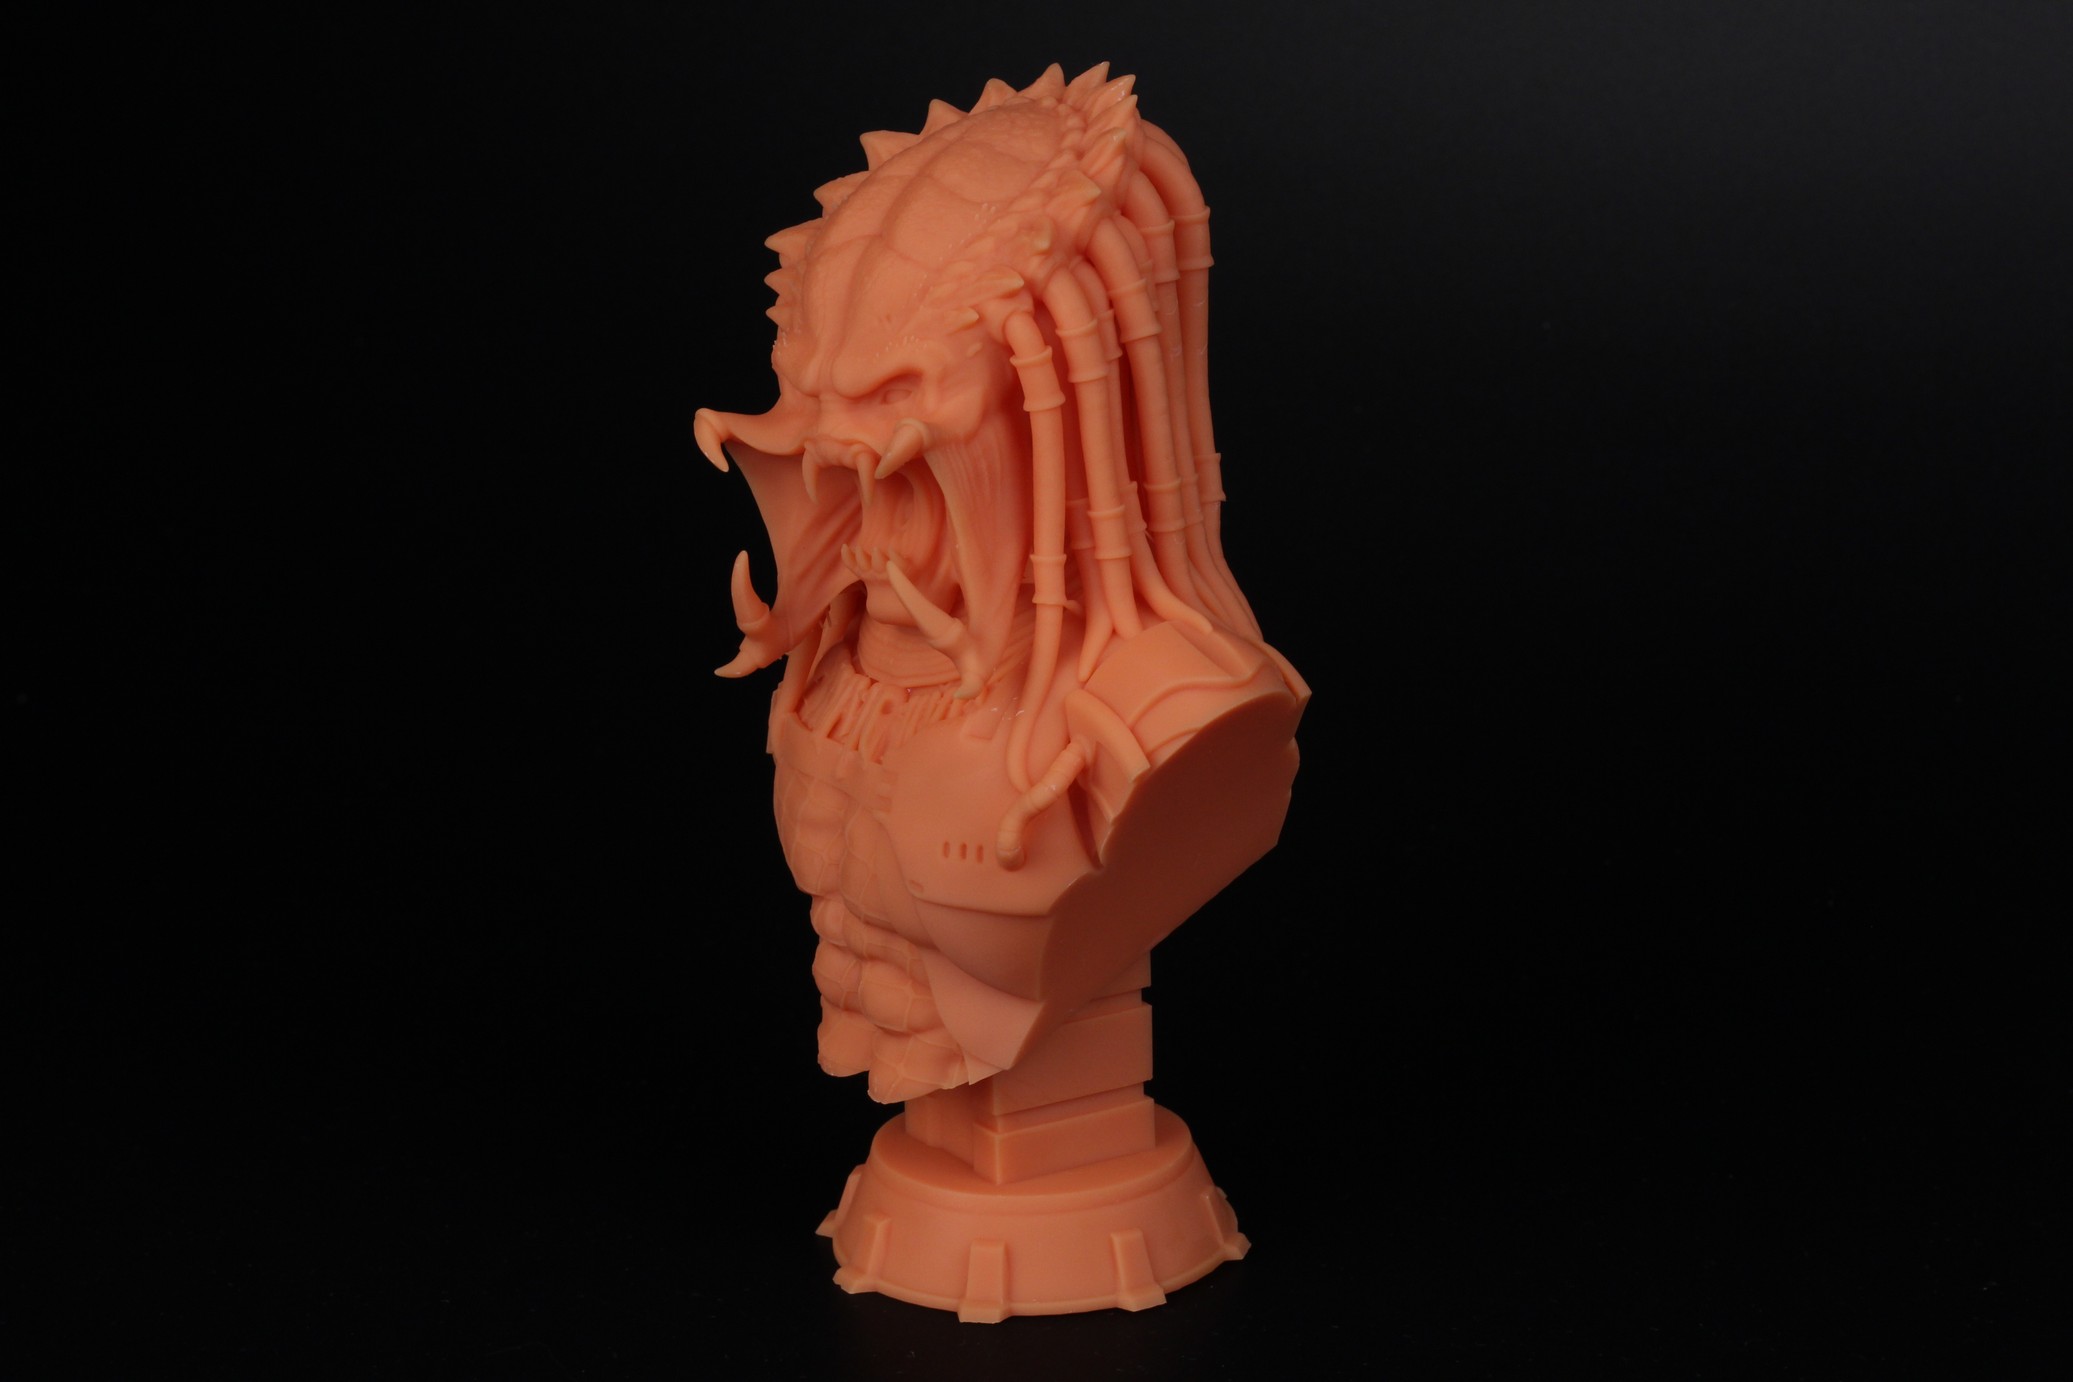 Predator Bust Anycubic Photon M3 Max Review 3 | Anycubic Photon M3 Max Review: Who Needs FDM Anymore?